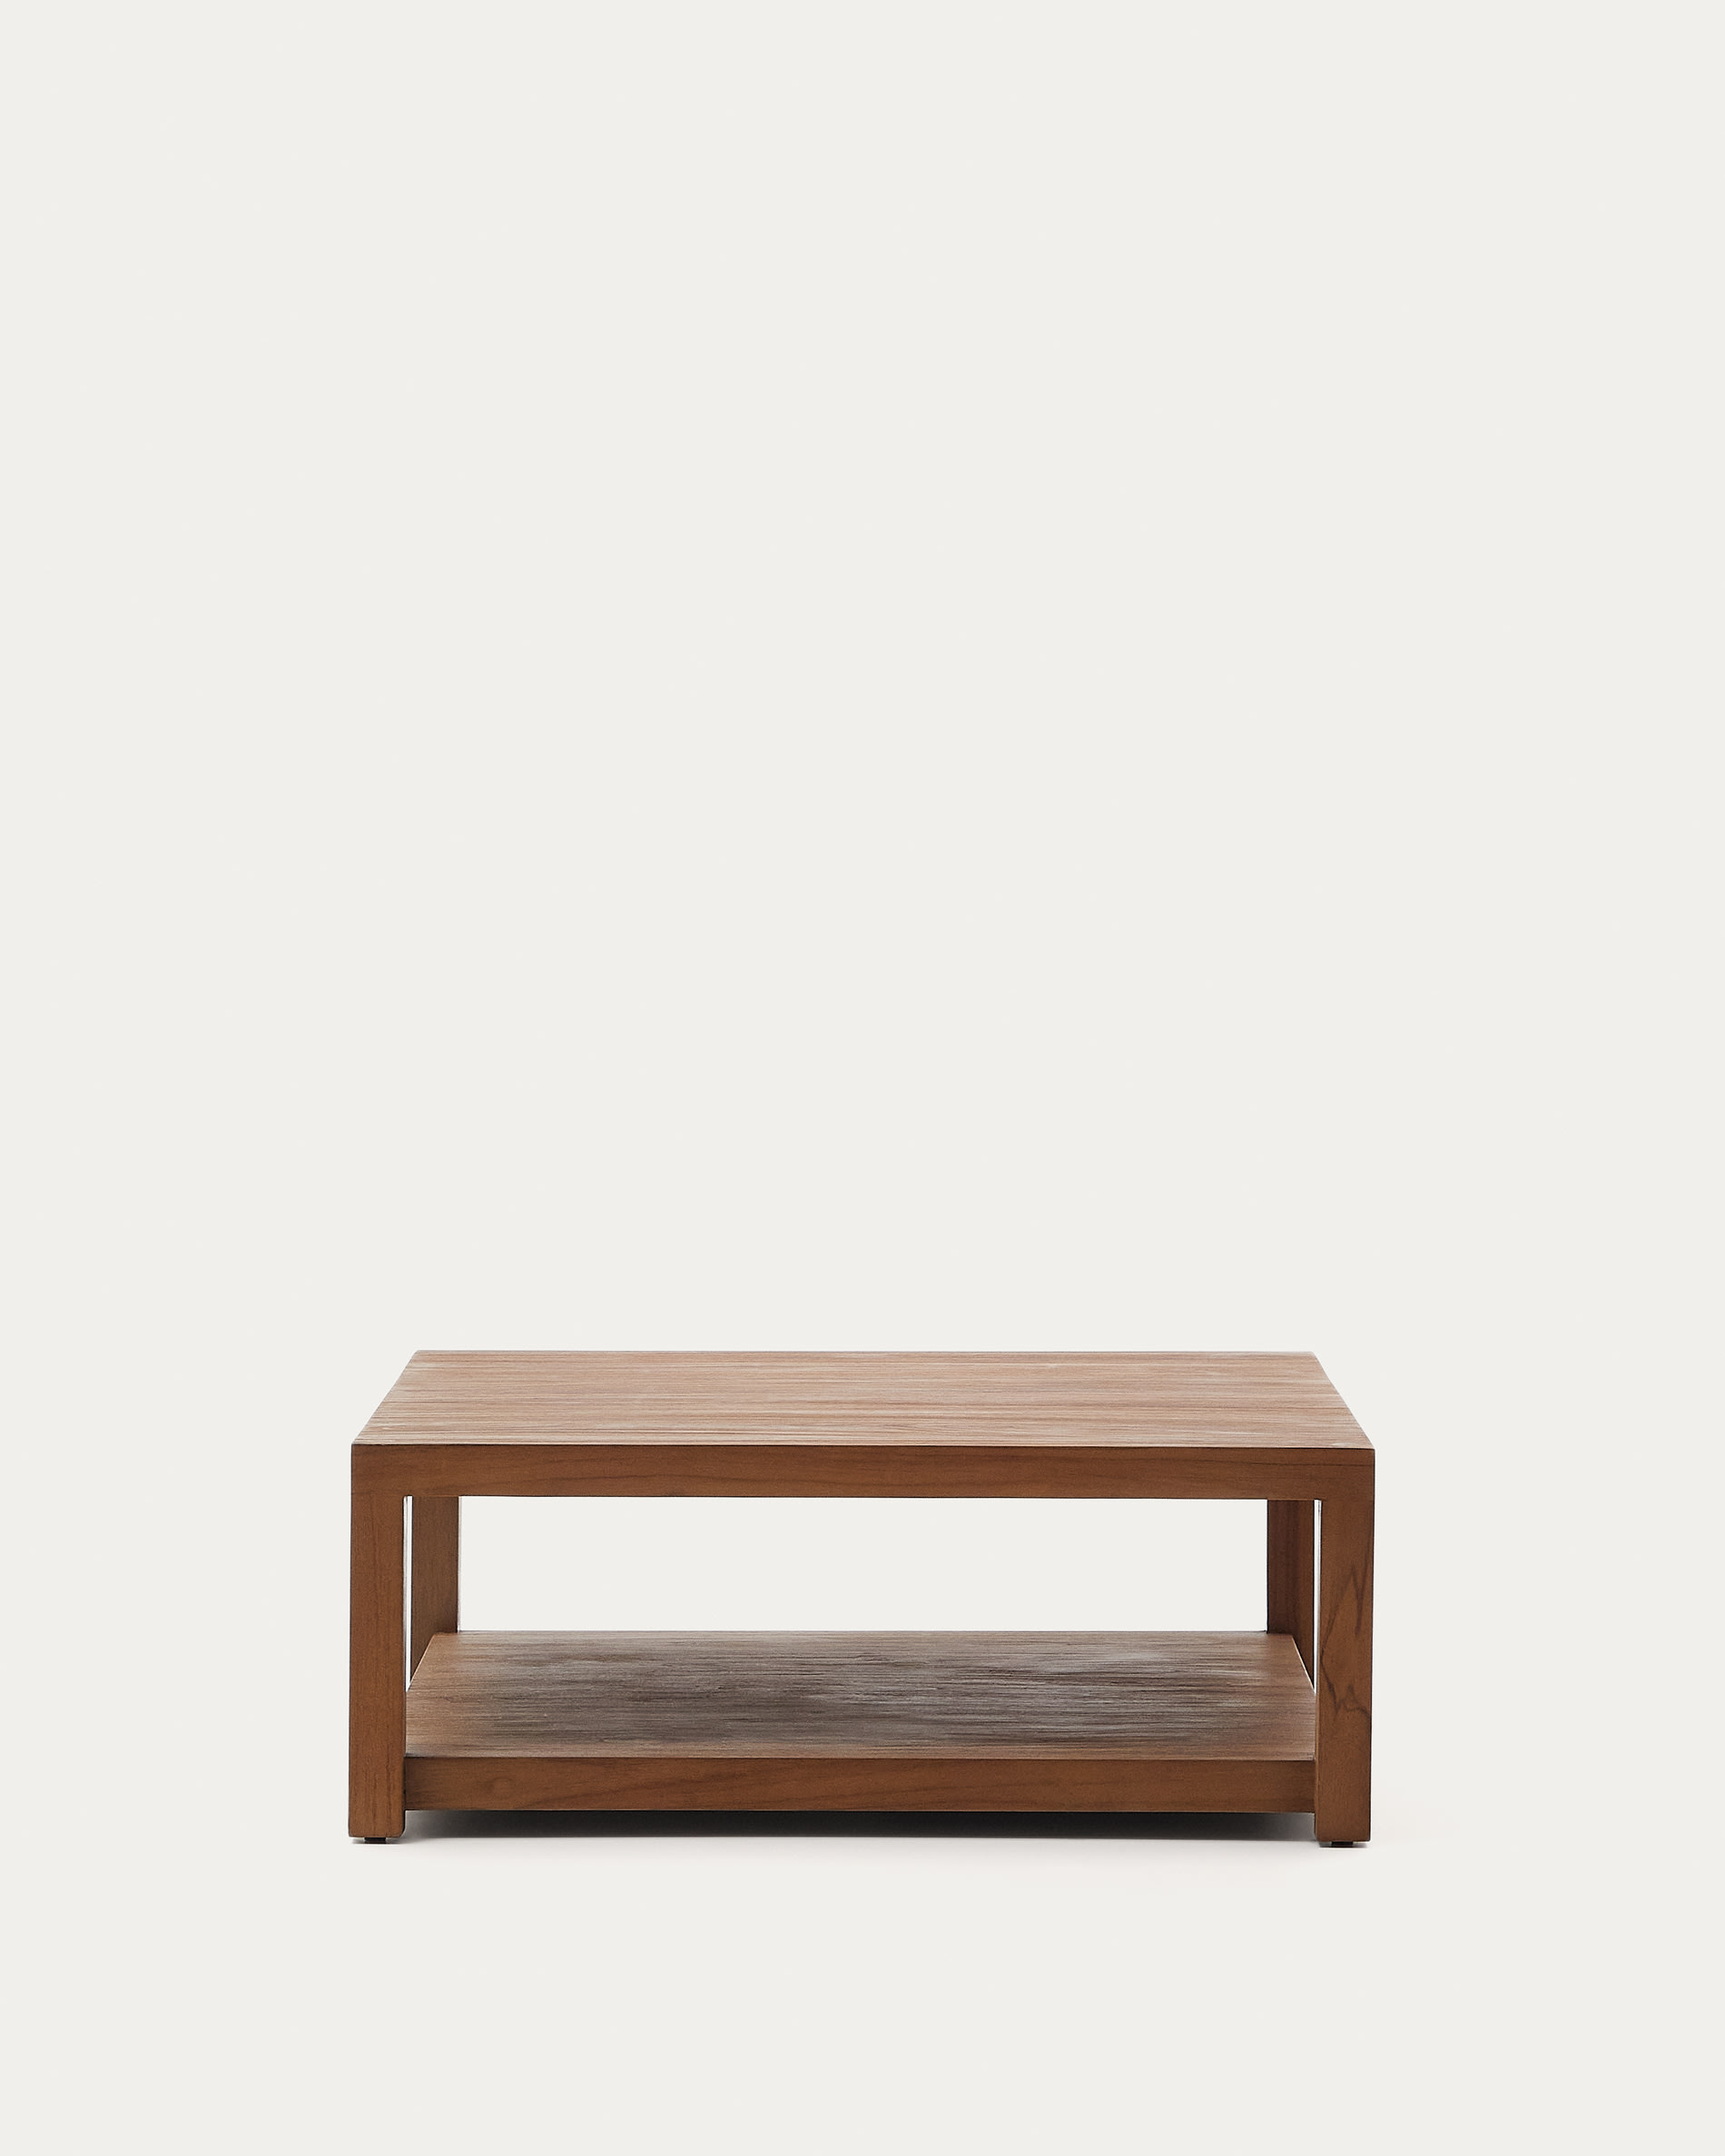 Sashi side table made in solid teak wood 90 x 90 cm